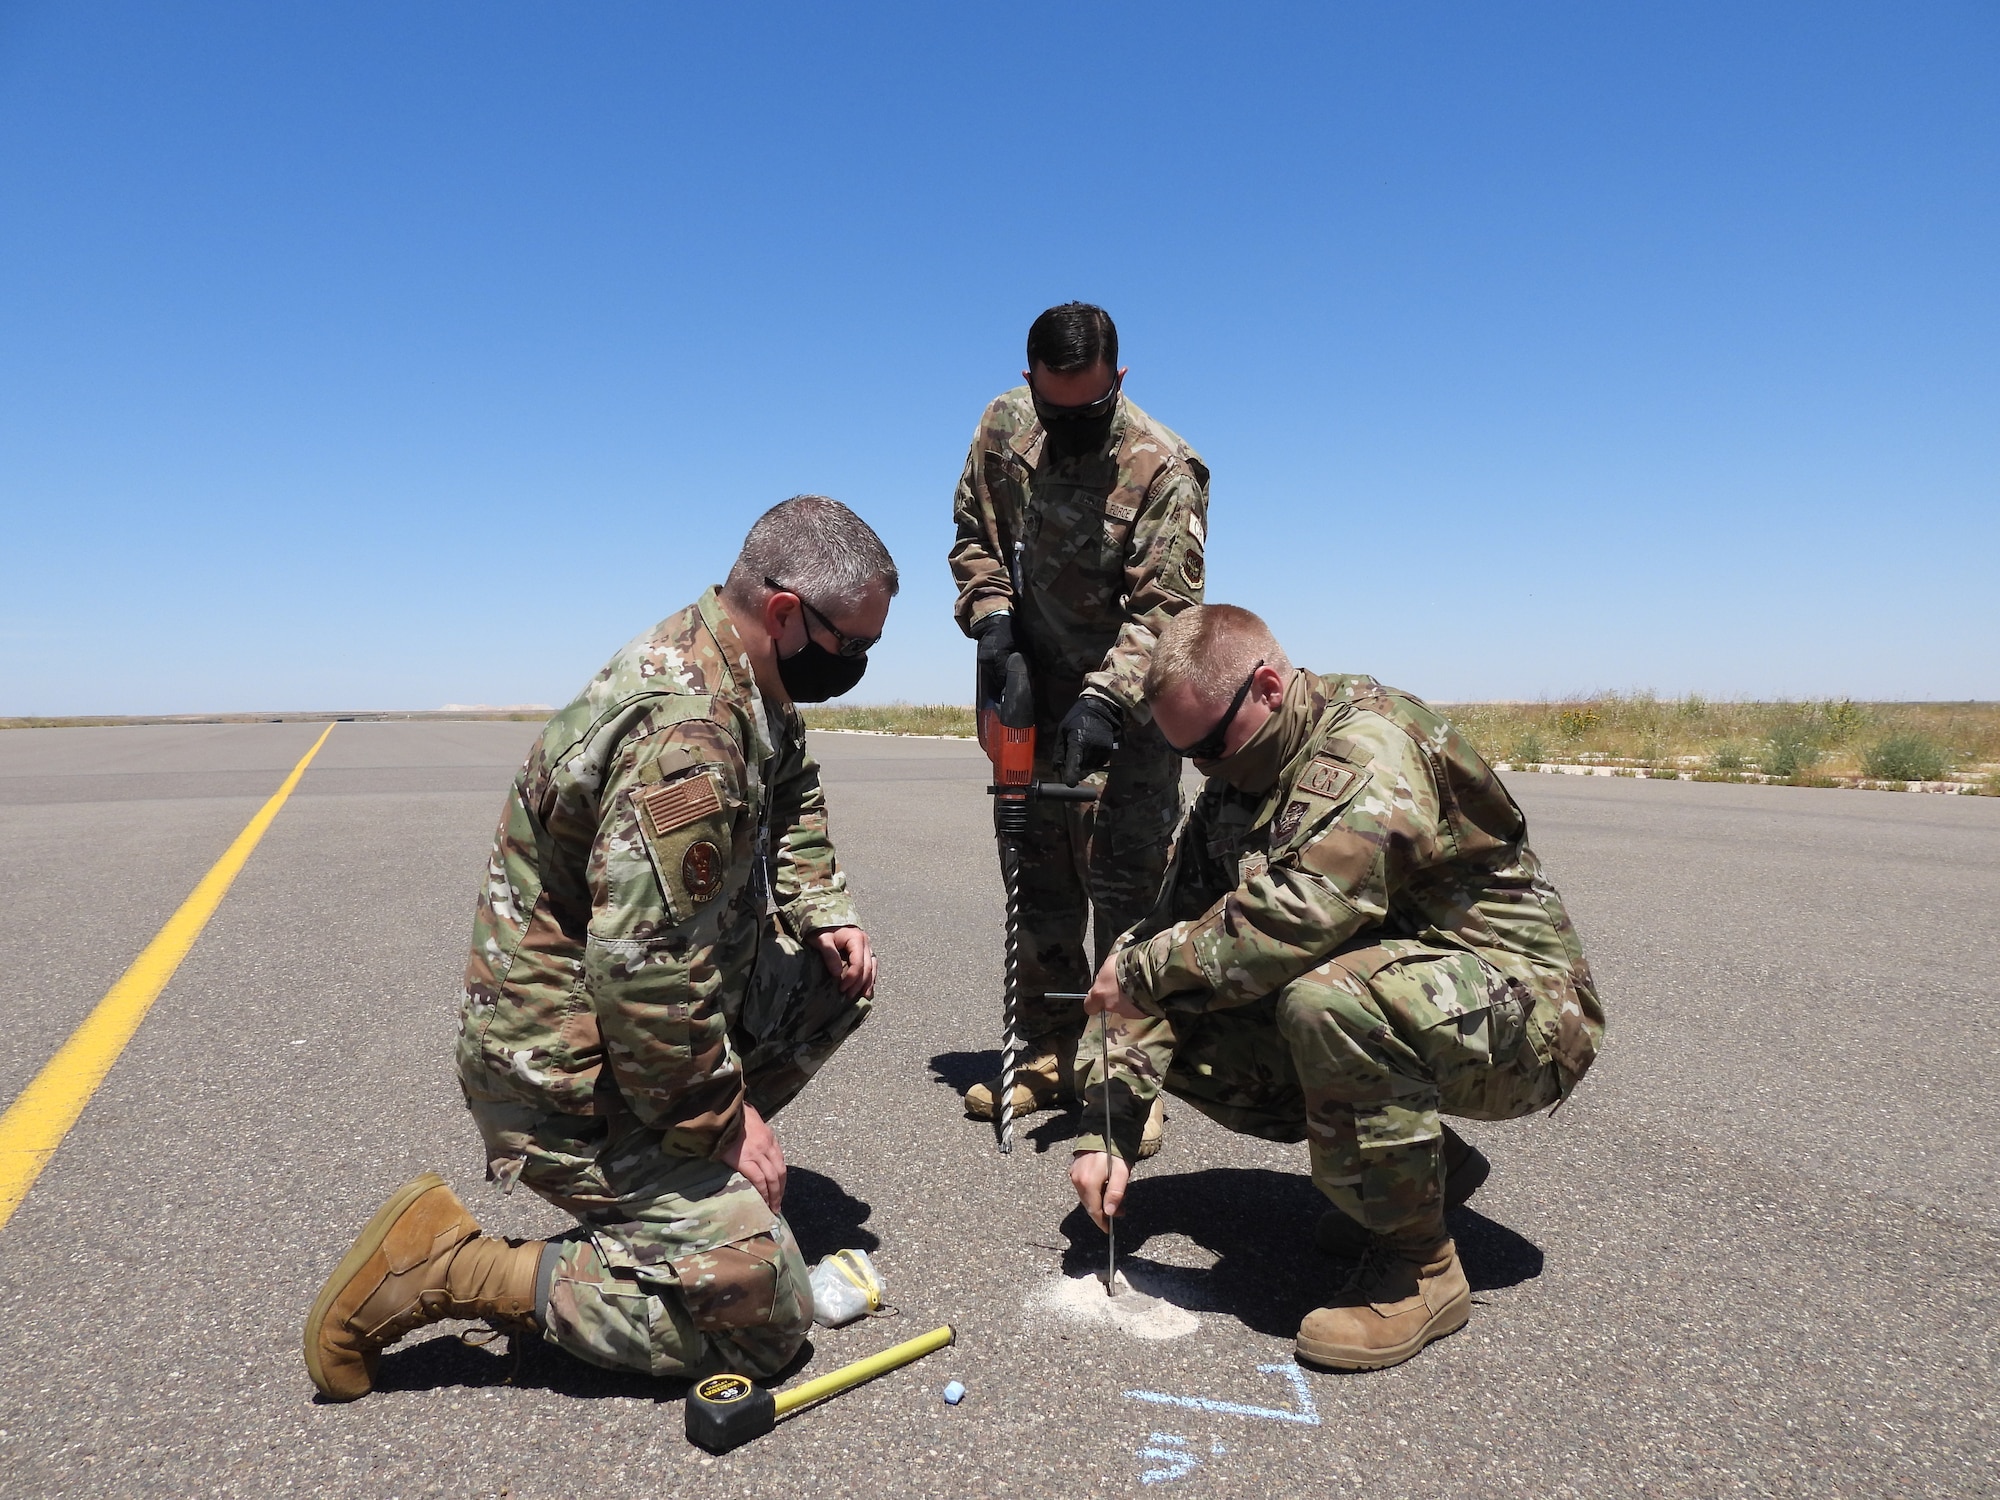 Tech. Sgt. William Russell, 818th Mobility Support Advisory Squadron air advisor, left, Master Sgt. John Vaccaro, 621st Contingency Response Squadron fuels technician, middle, and Tech. Sgt. Christopher Anderson, 621st Contingency Response Support Squadron civil engineer, right, measure the depth of pavement by drilling holes in a taxiway at Ben Guerir Air Base, Morocco, April 18, 2021. The members, assigned to an airfield survey team, deployed at the request of Air Mobility Command to conduct five airfield surveys across the Kingdom of Morocco ahead of African Lion 21, U.S. Africa Command’s largest exercise, scheduled to take place in Morocco, June 7-18. (courtesy photo)